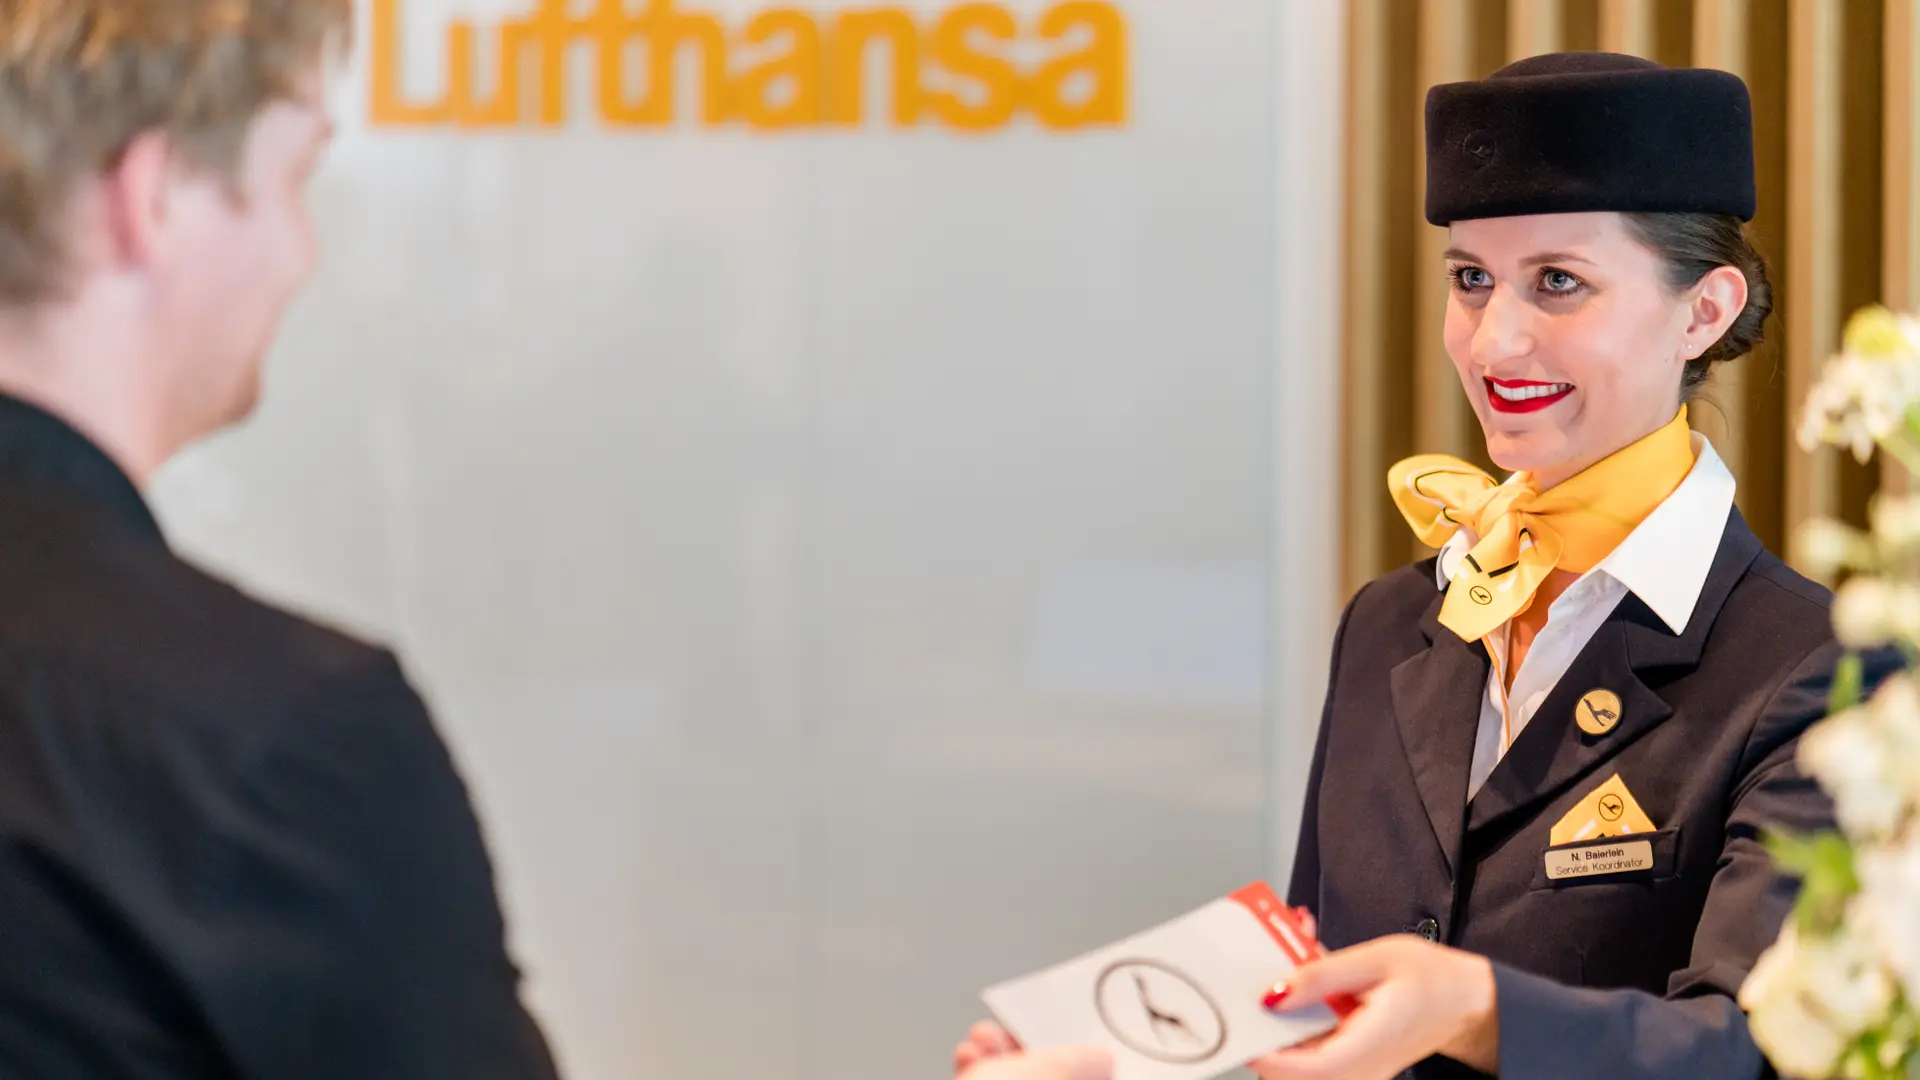 Airline review Airport experience - Lufthansa - 15